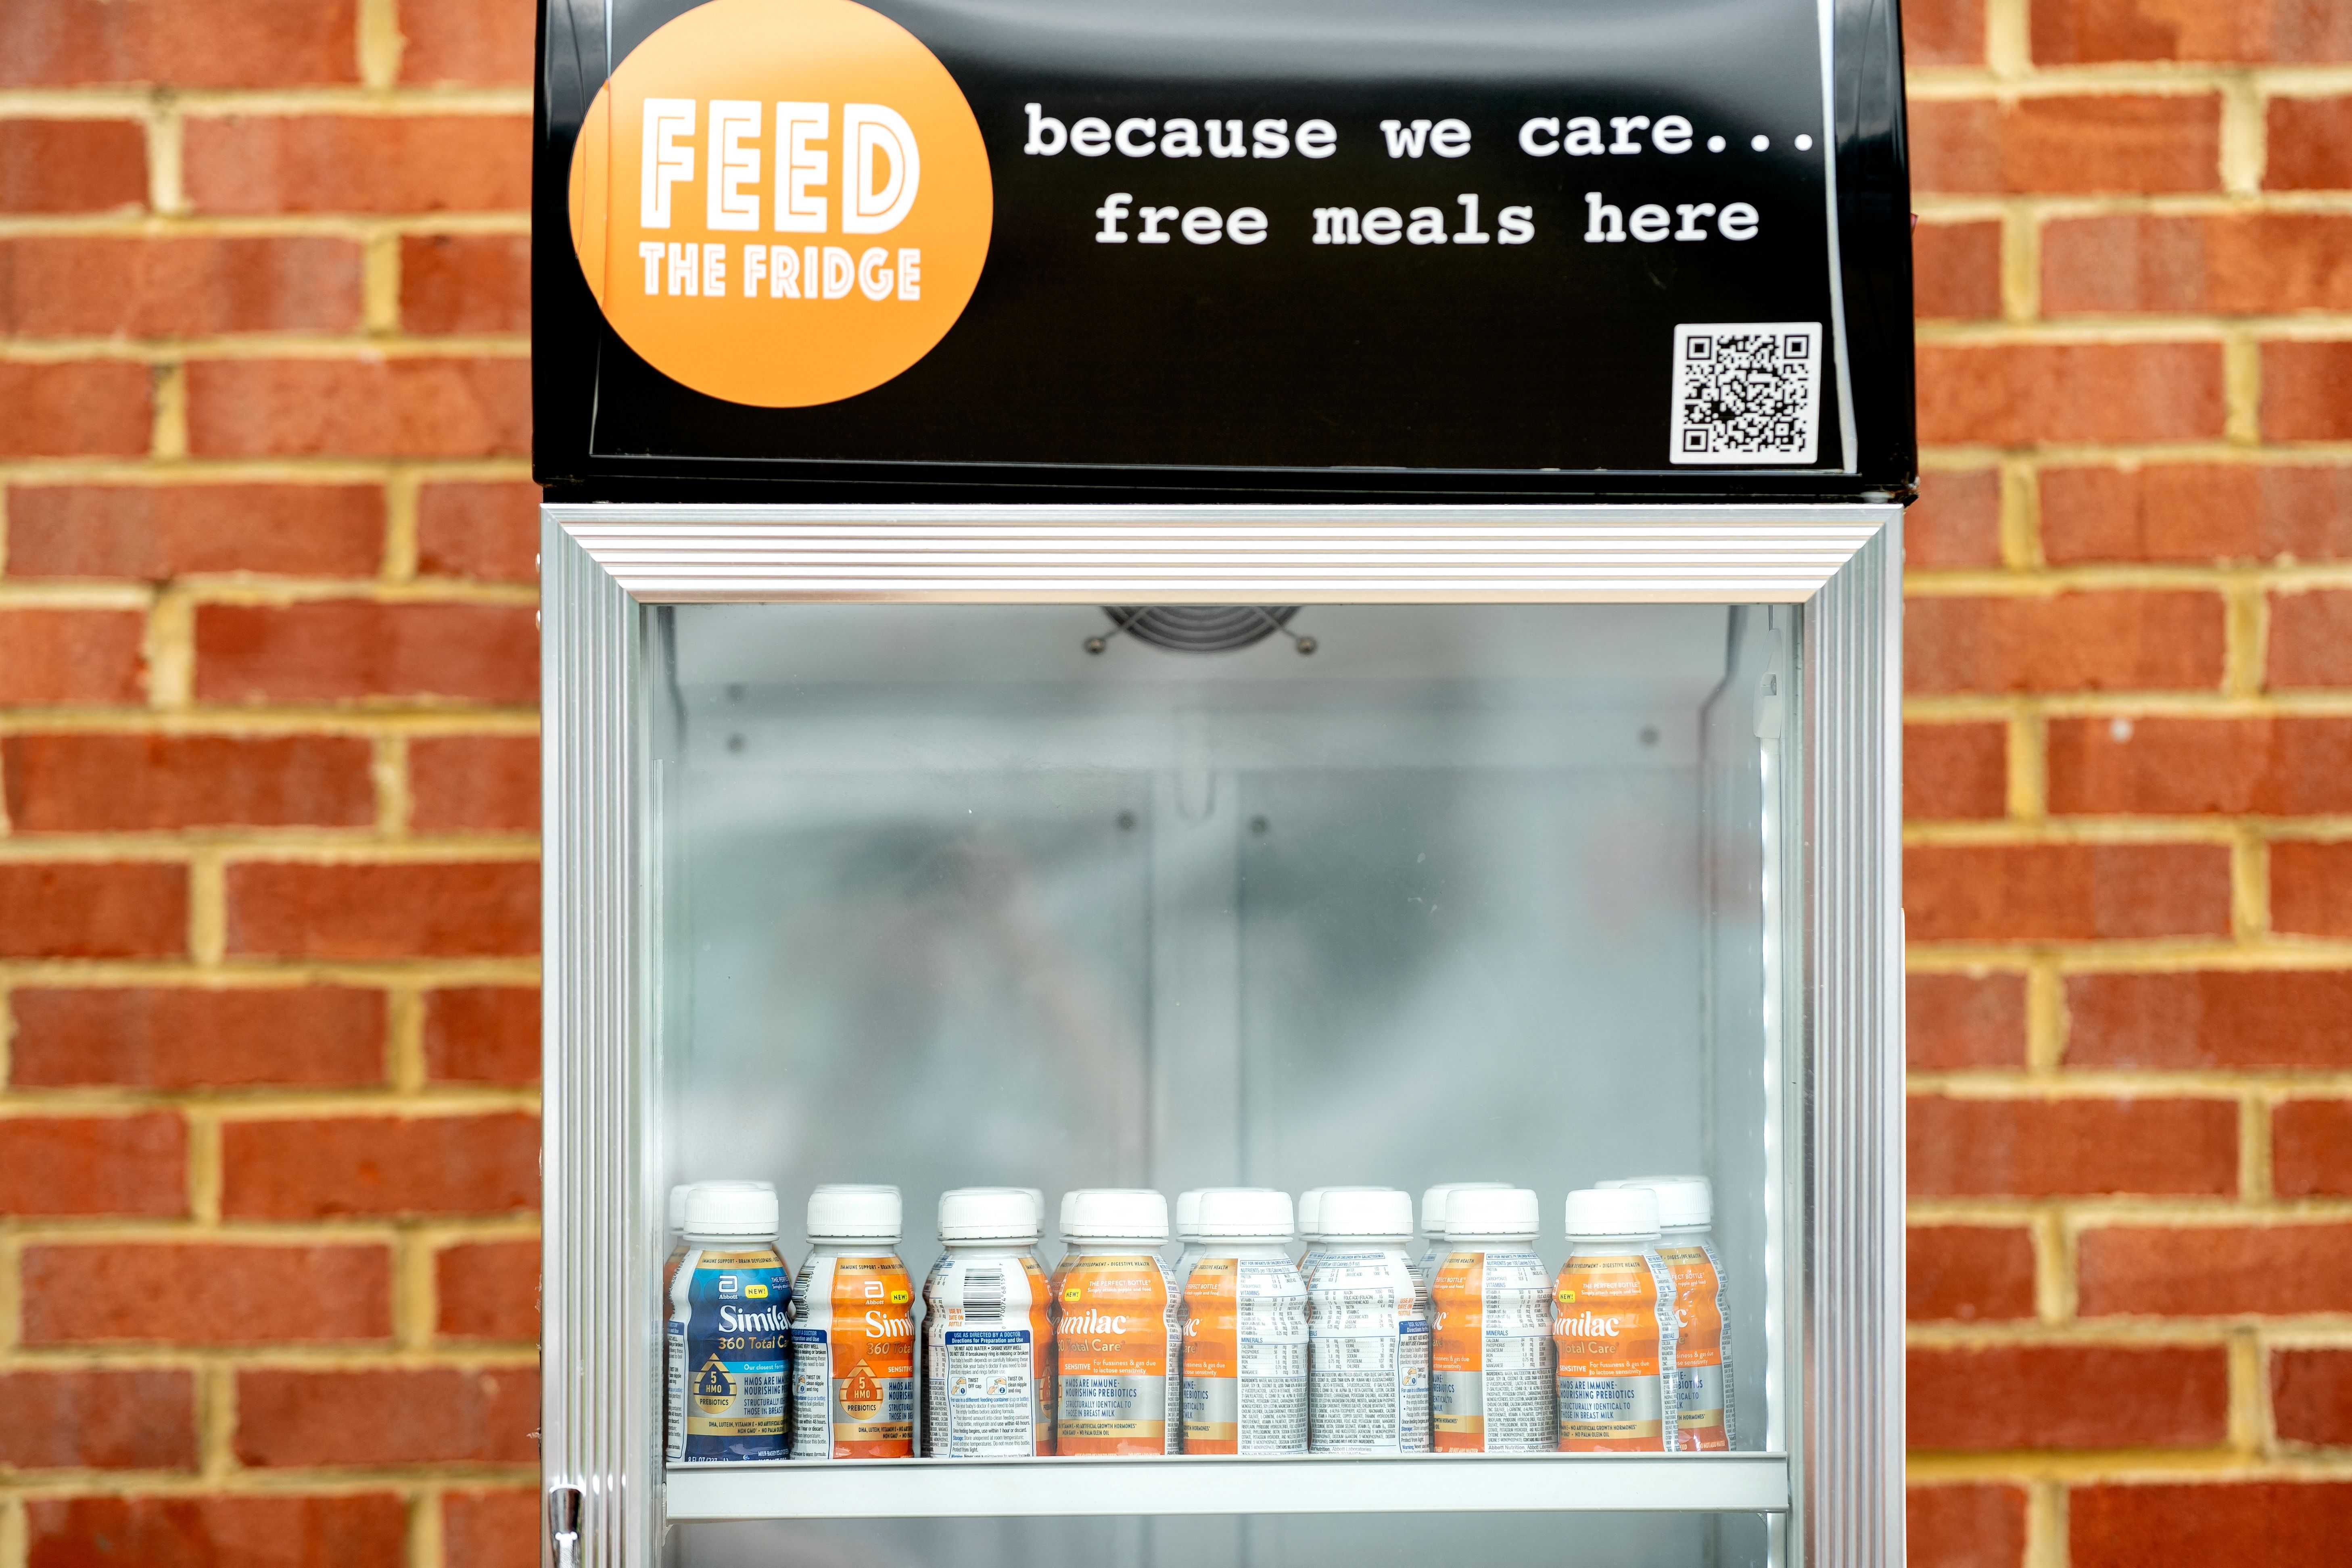 Photo shows a fridge labeled with "Feed the Fridge" at the top